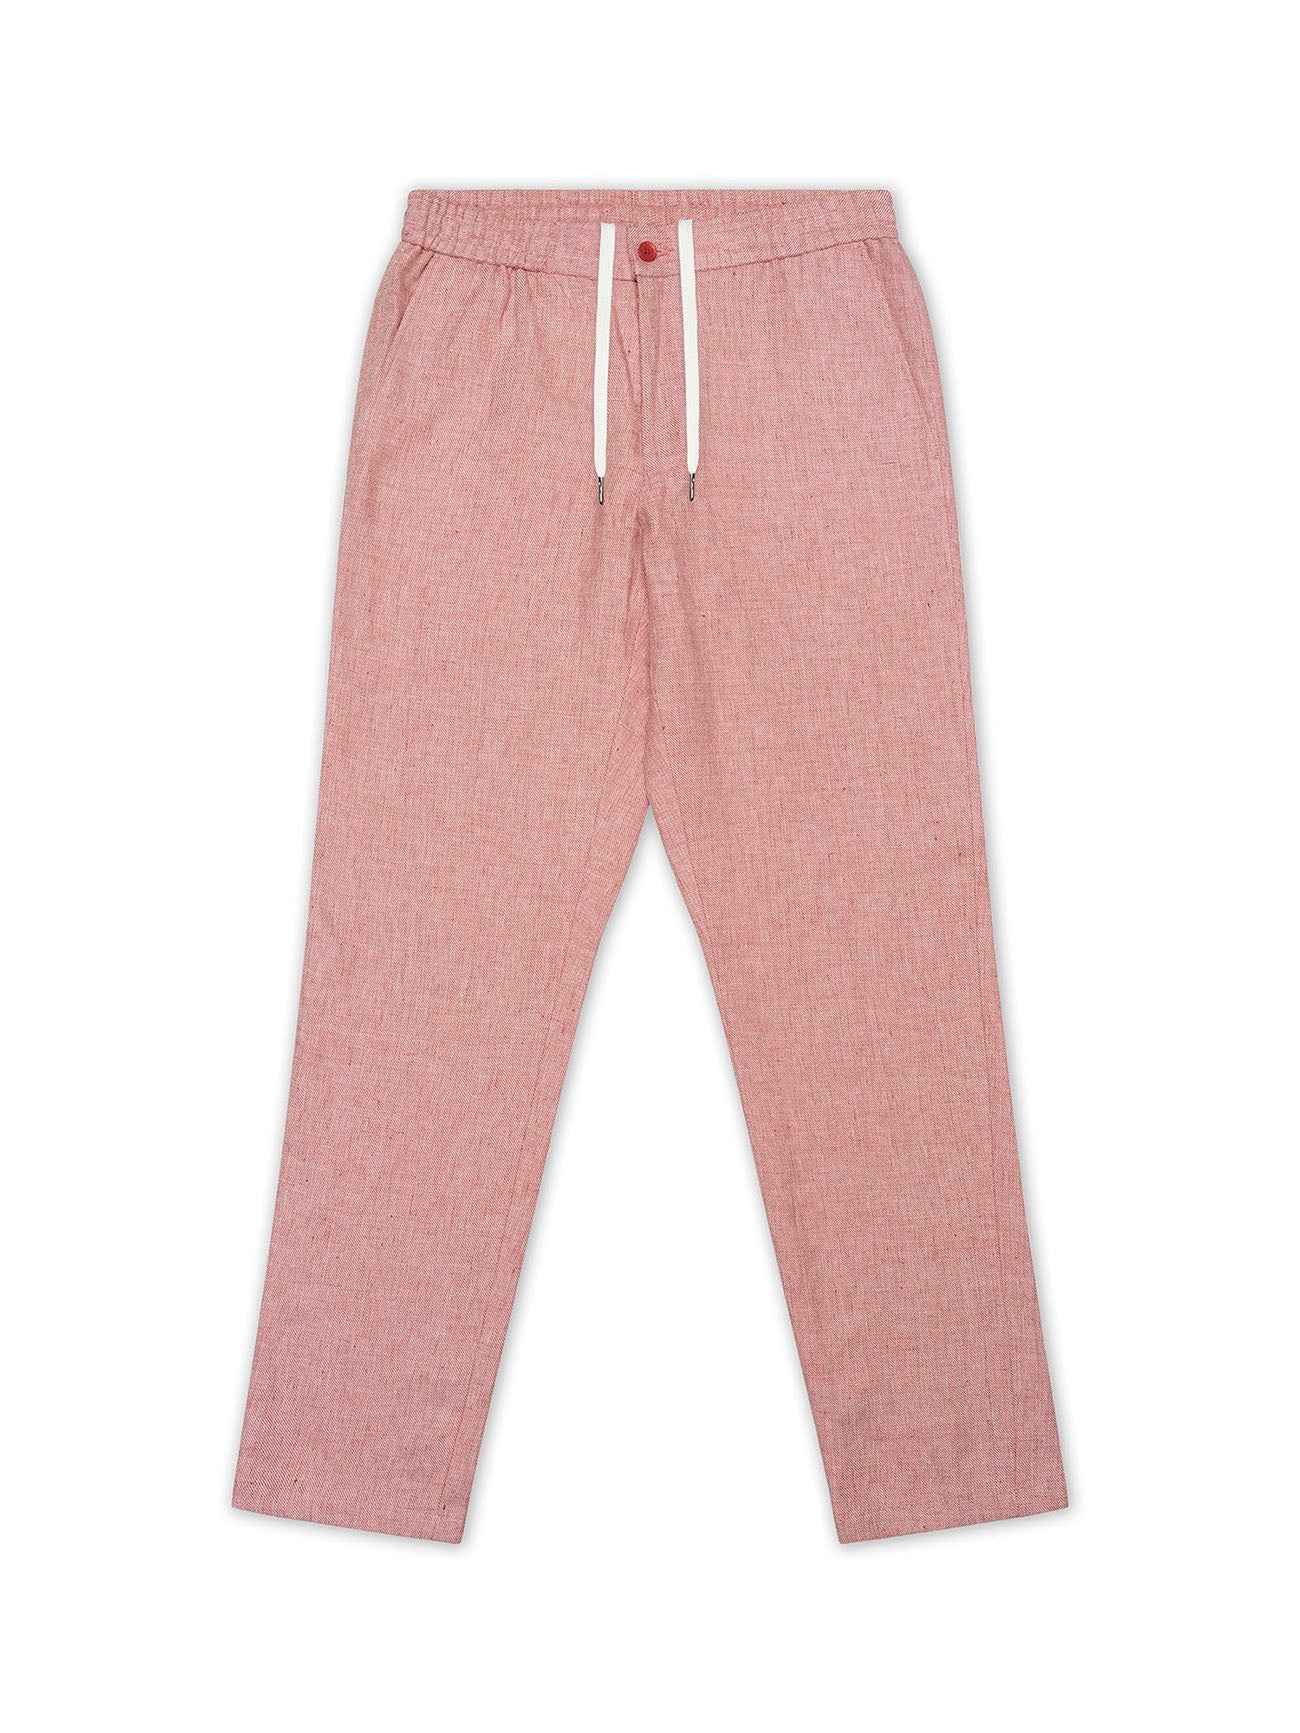 Coral Red Linen Jogger Pant